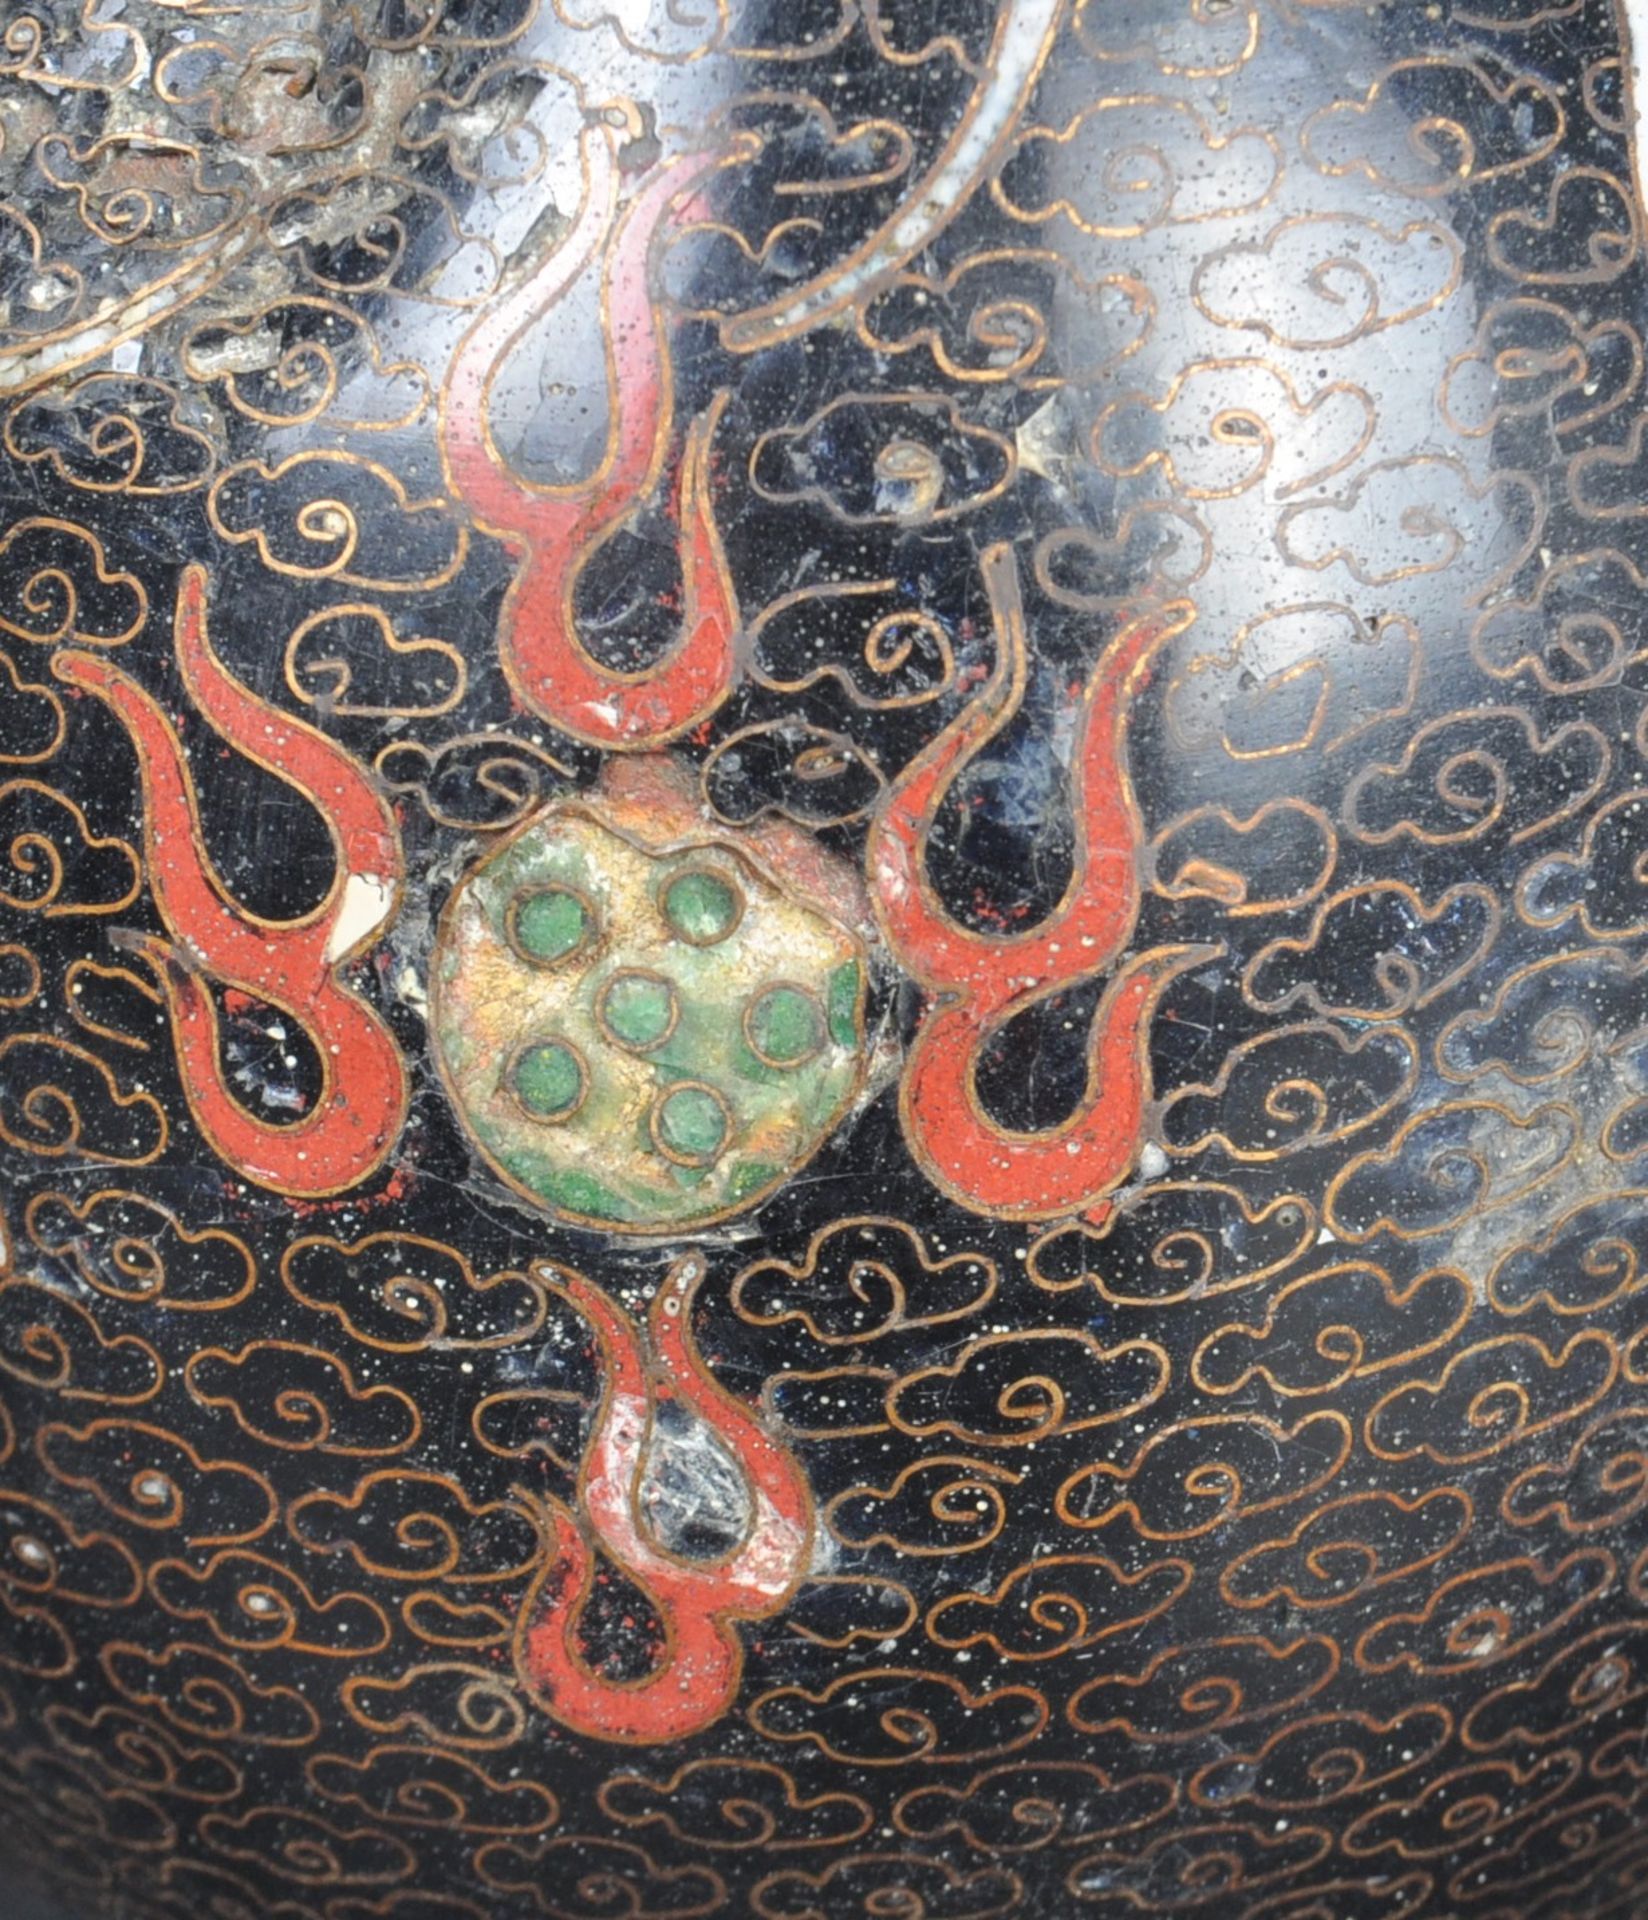 PAIR OF 19TH CENTURY CHINESE CLOISONNE DRAGON VASES - Image 5 of 7